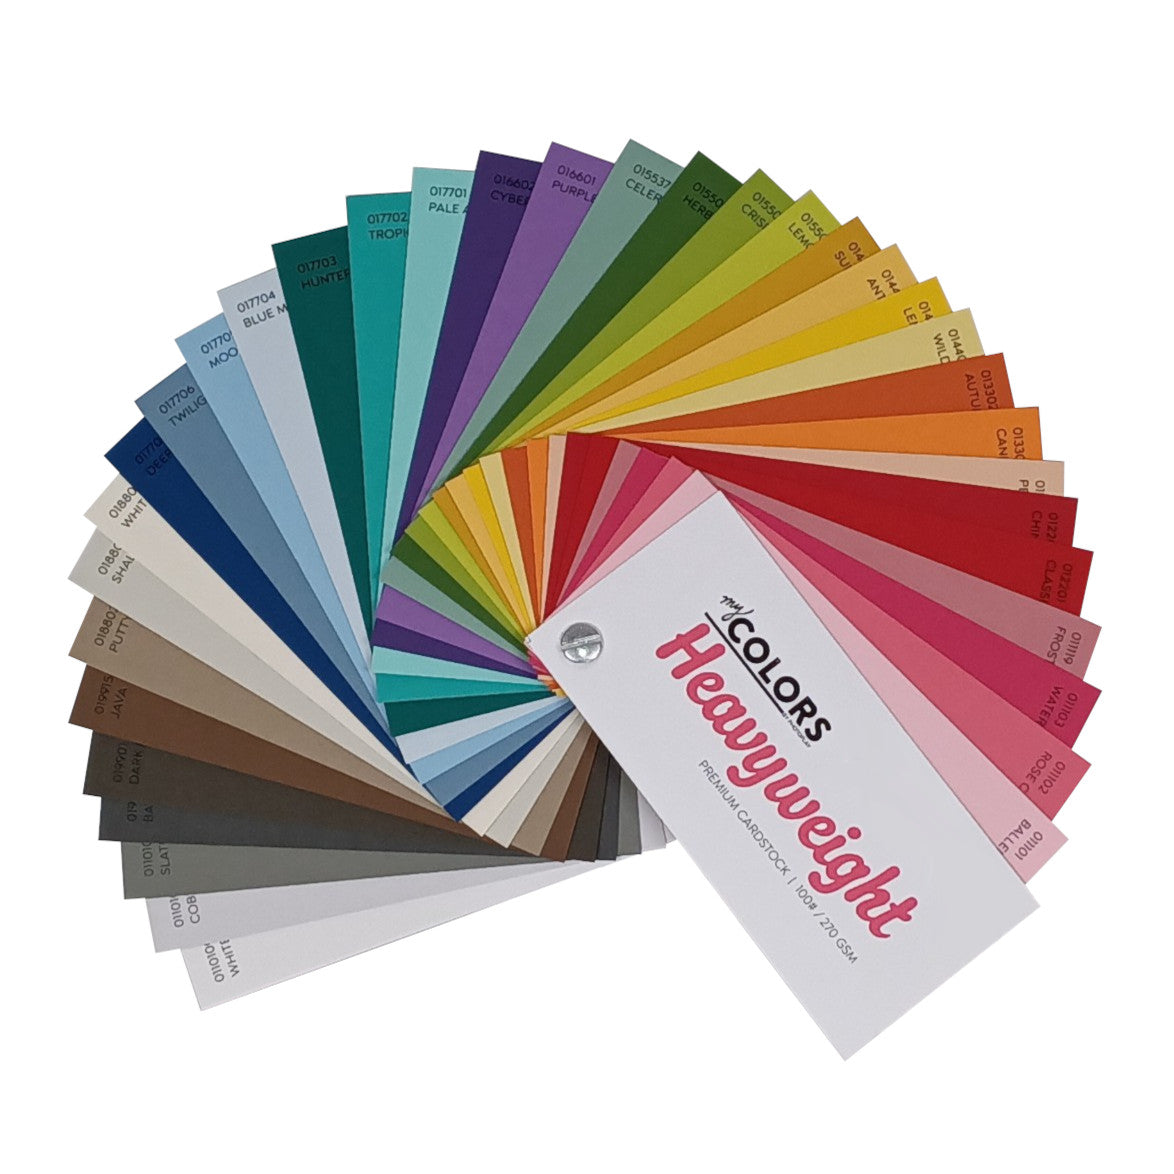 Swatch Book for all 36 colors of Heavyweight cardstock from My Colors